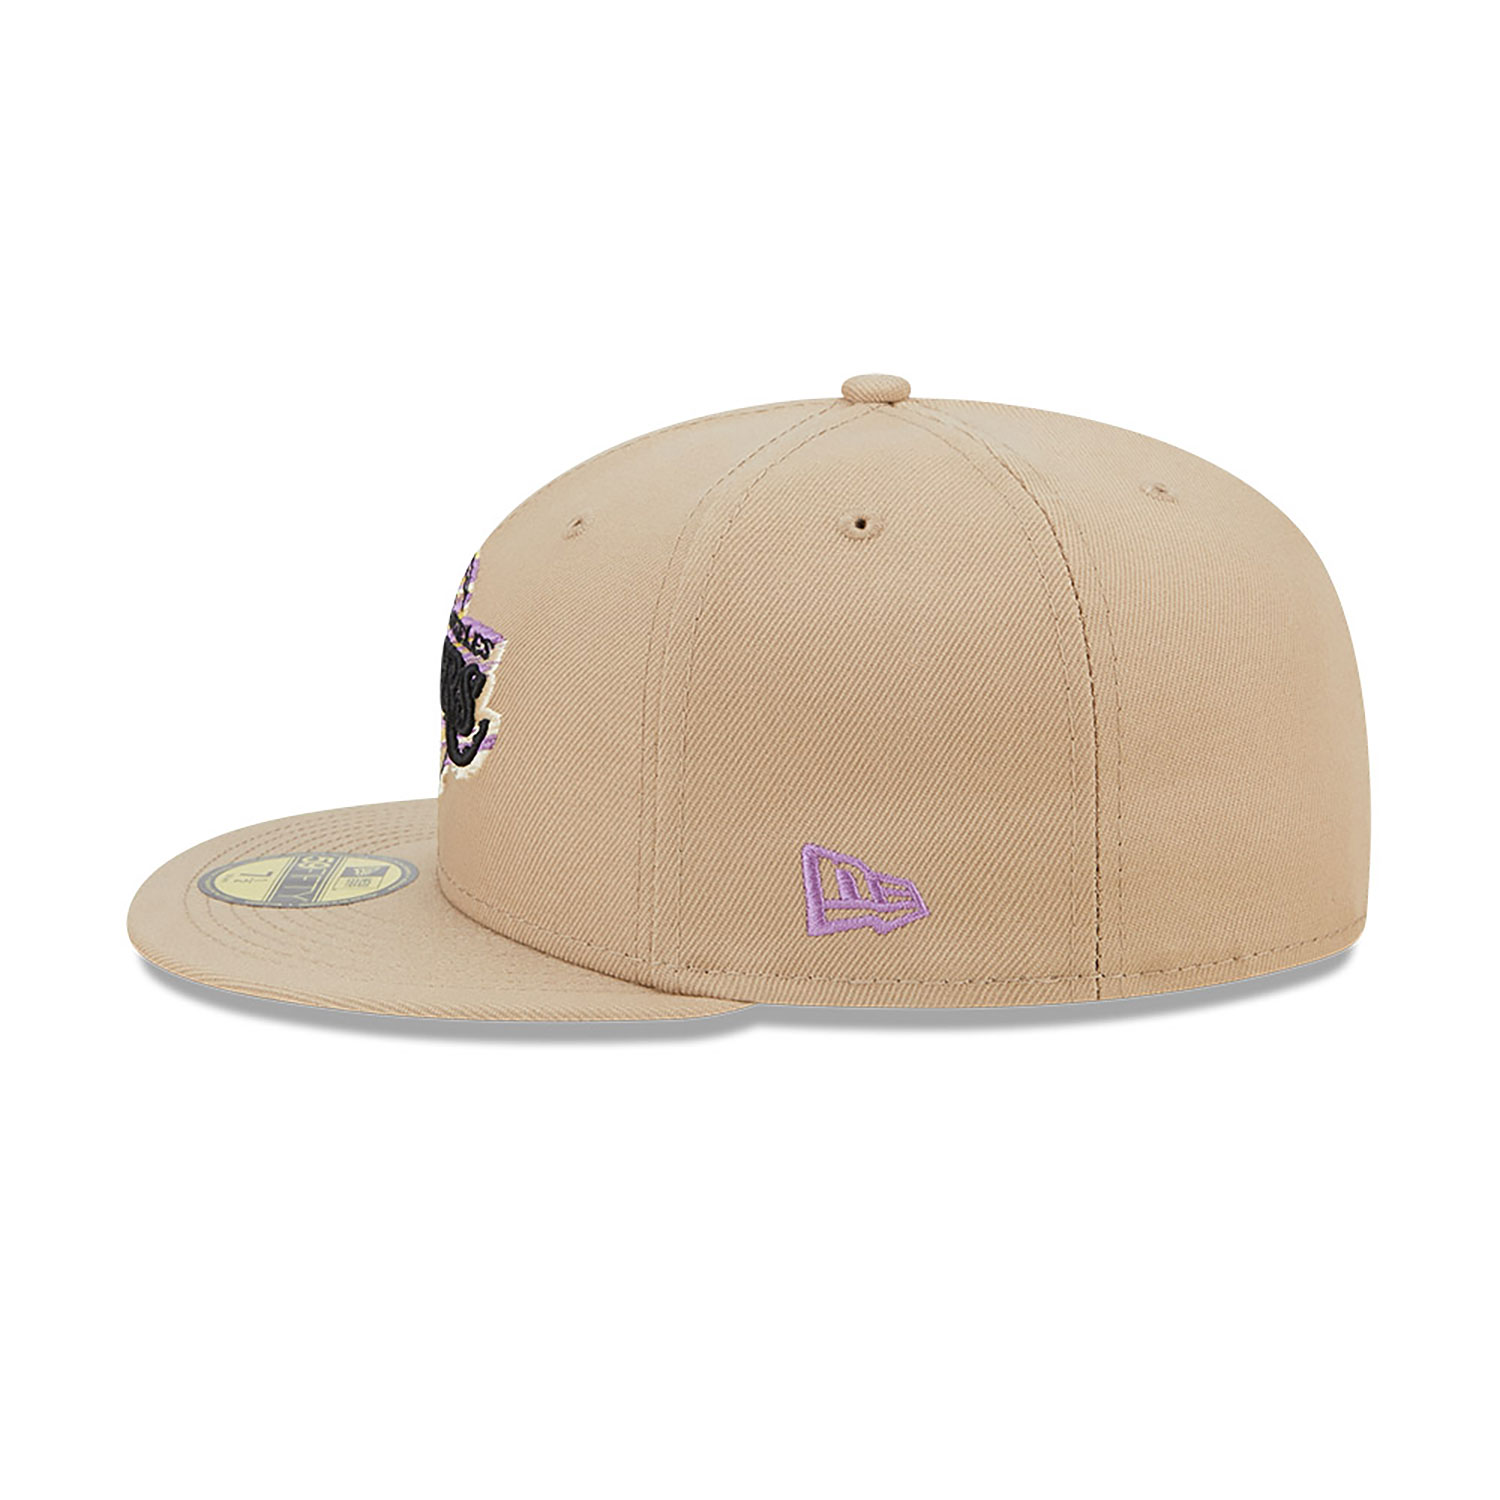 LA Lakers Team Neon Beige 59FIFTY Fitted Cap